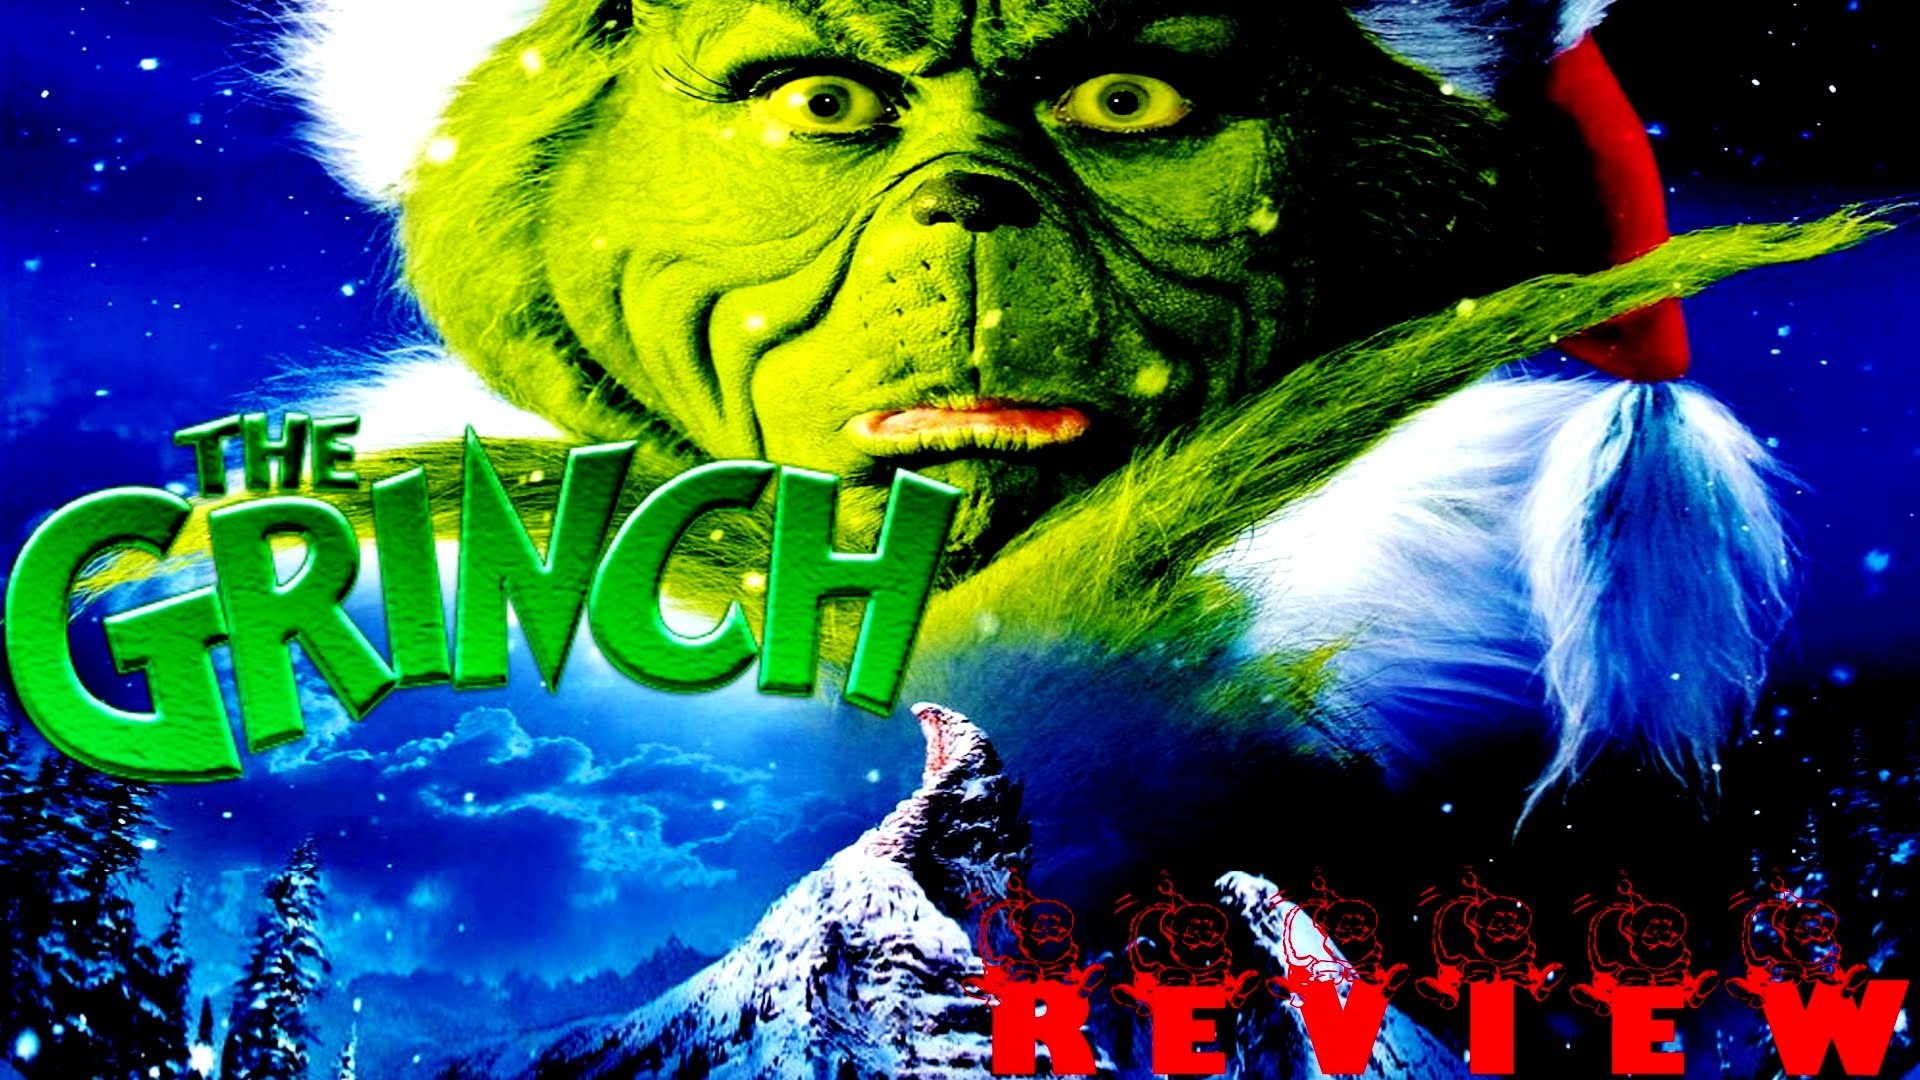 1920x1080 Dr Seuss' How The Grinch Stole Christmas (2000) MOVIE REVIEW!! - YouTube